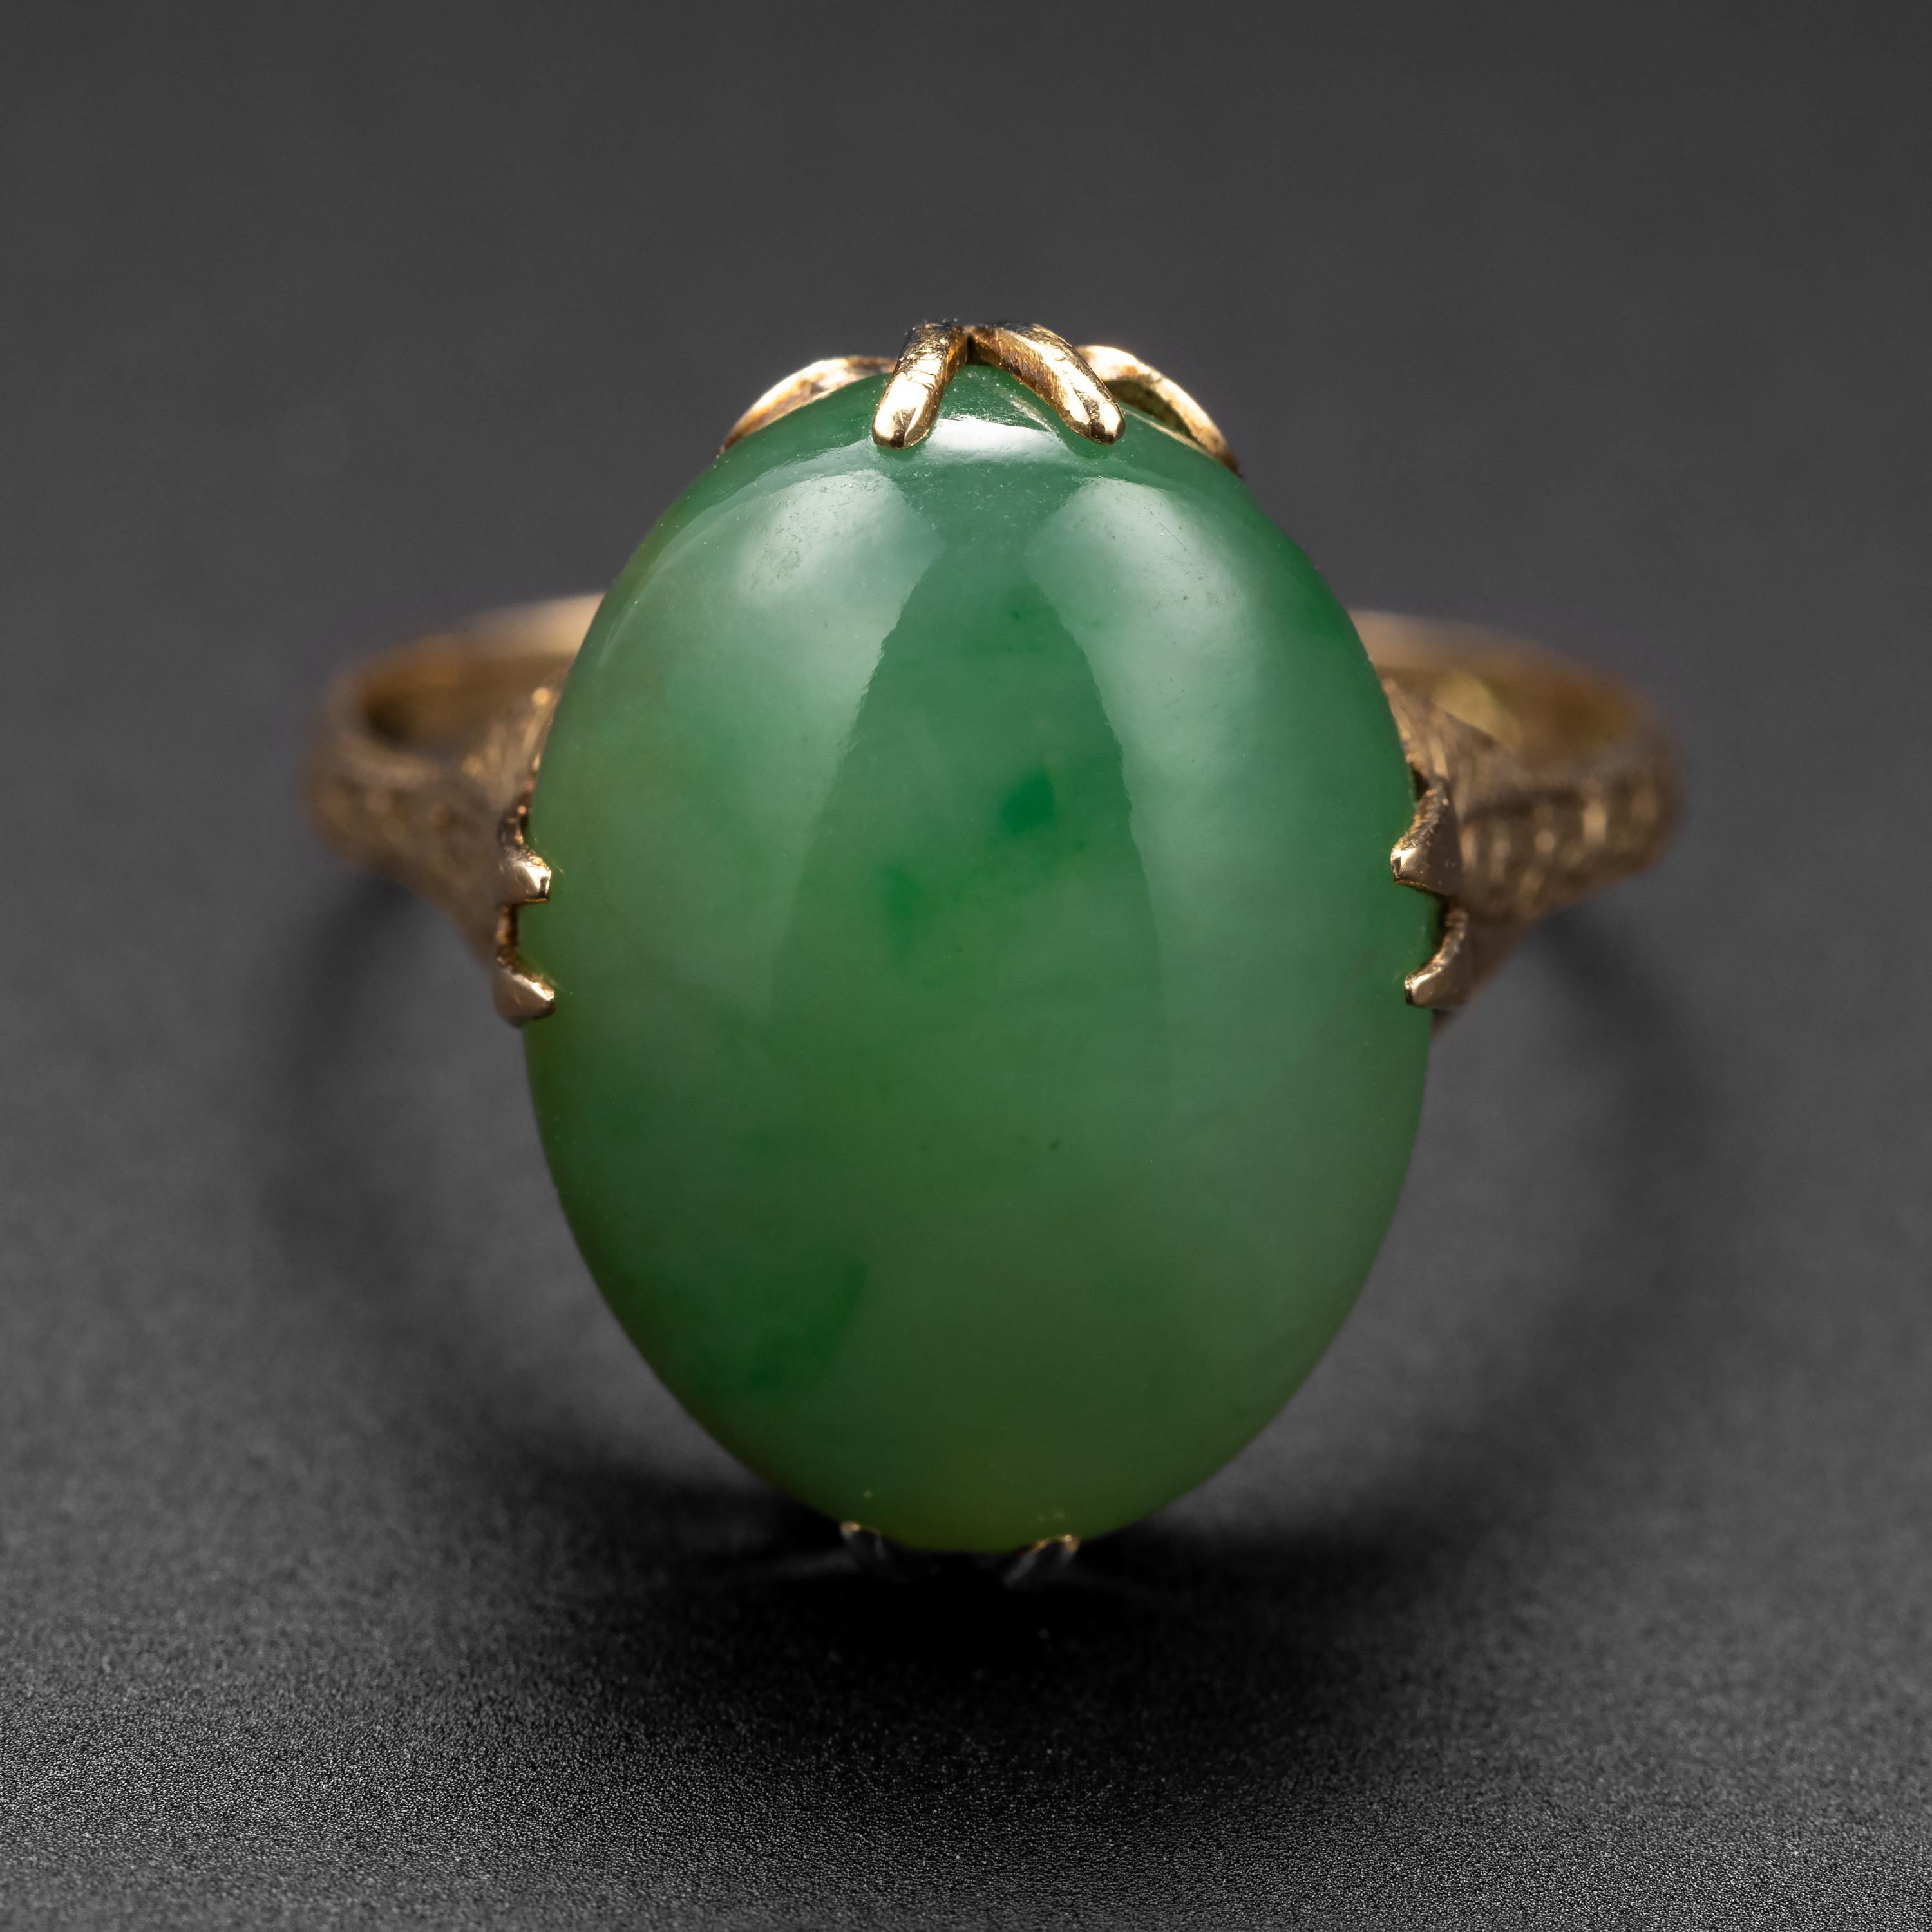 Perfectly proportioned, this antique Edwardian-era jade ring is a showcase for a highly translucent, luminous orb of certified natural and untreated jadeite jade from Burma. Created by hand near 1900, this elegant and classic jade ring features a